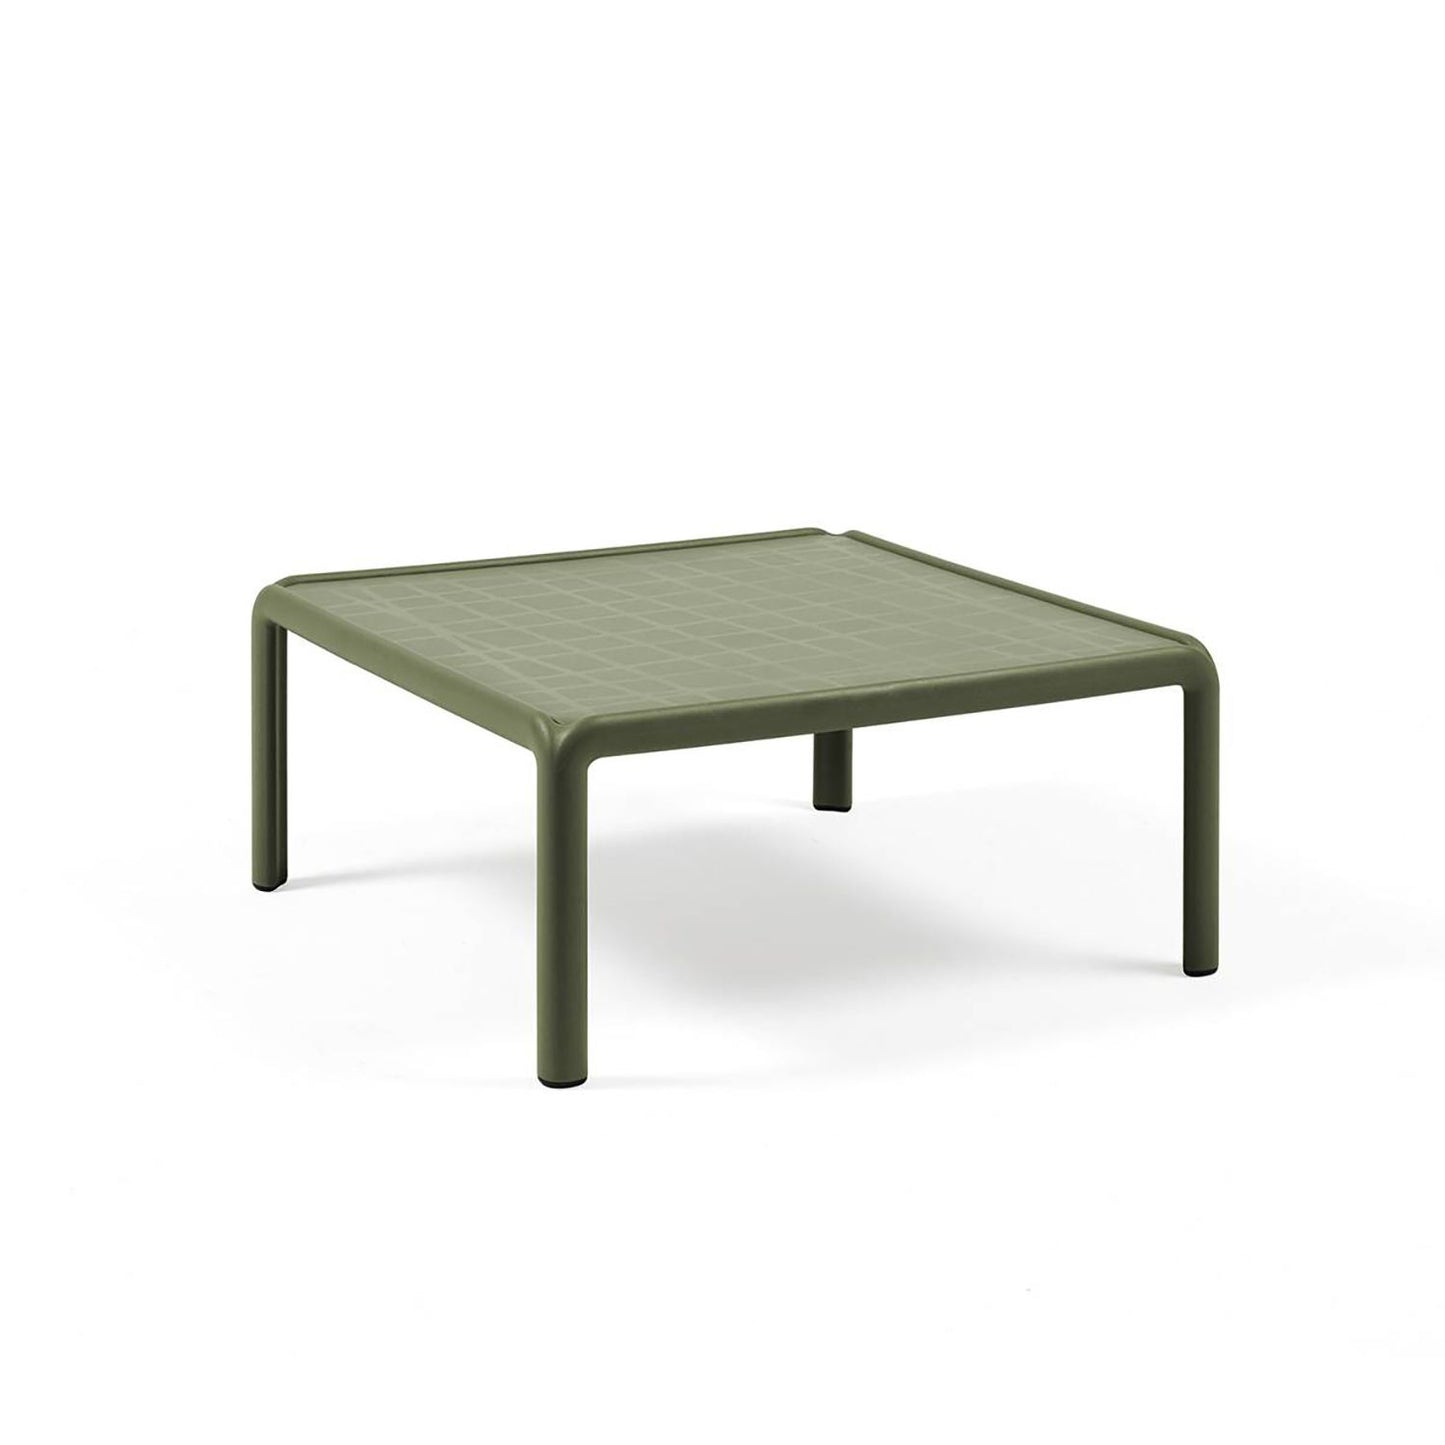 Komodo Coffee Table Without Glass By Nardi - Olive